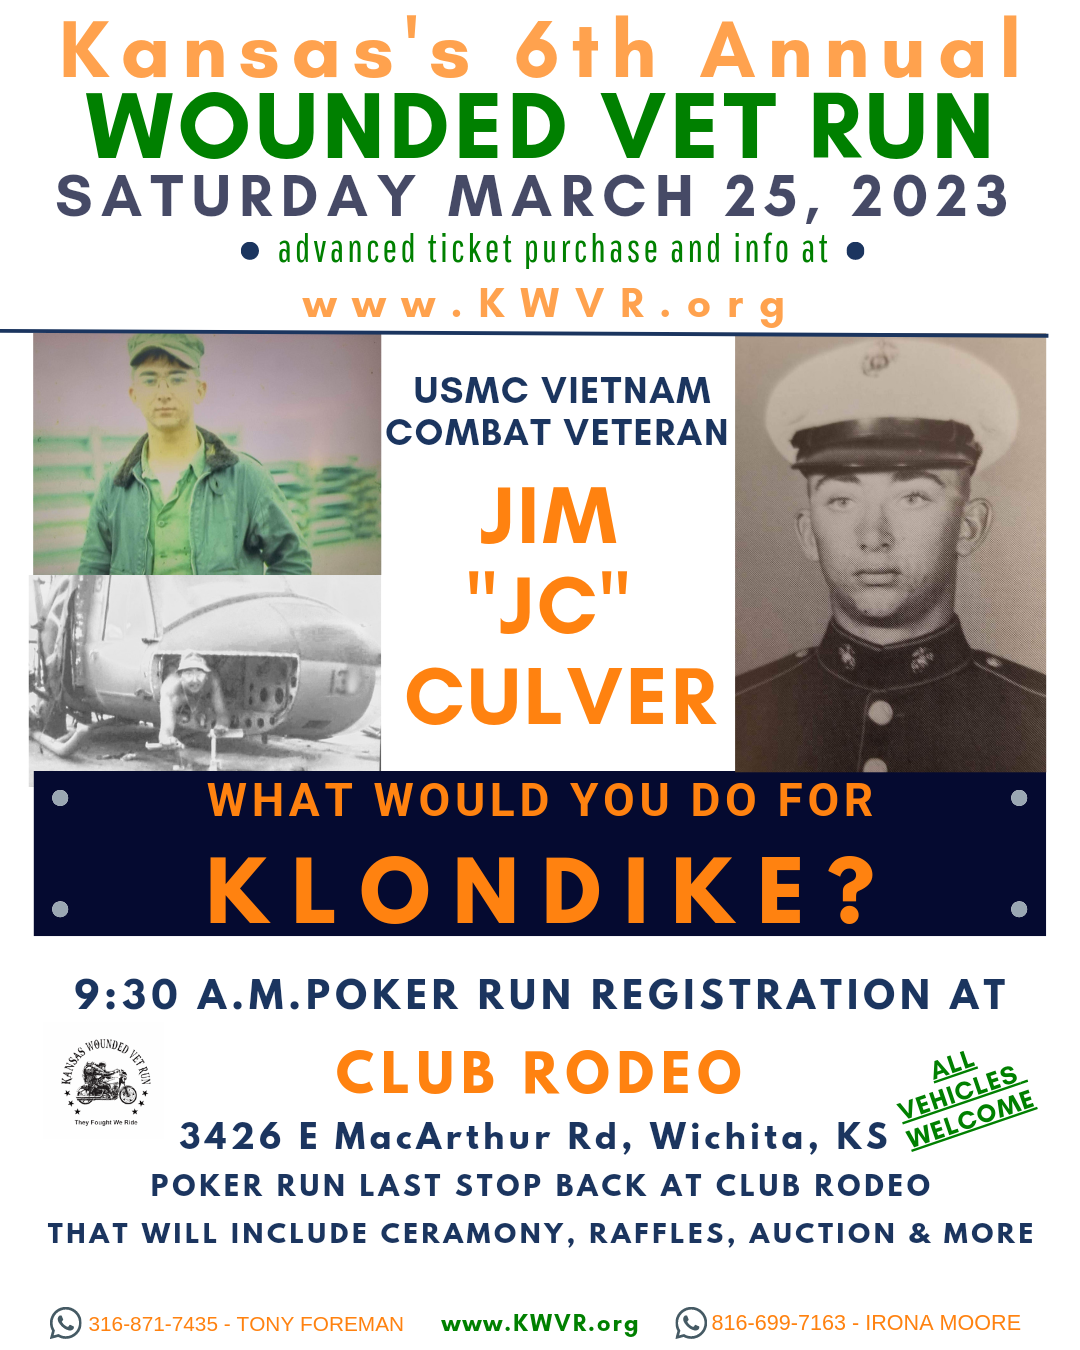 Wichita Events - 6th Annual Wounded Vet Run